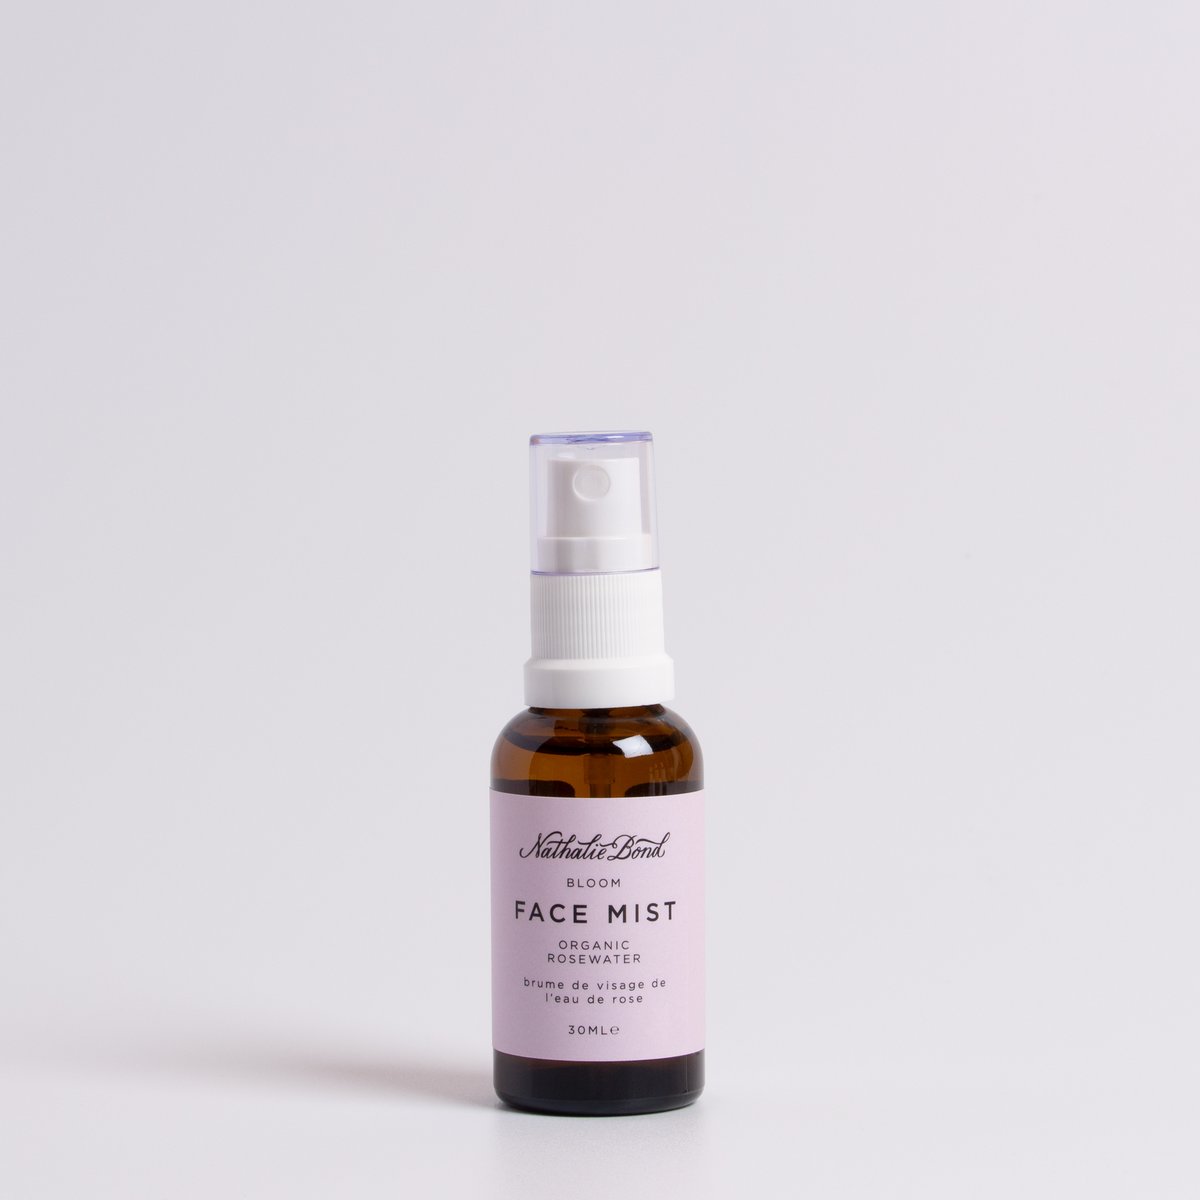 Load image into Gallery viewer, Nathalie Bond Bloom Face Mist | 100% Natural gentle rosewater mist tones, cools and hydrates the skin | Vegan, Cruelty Free, Made in the UK
